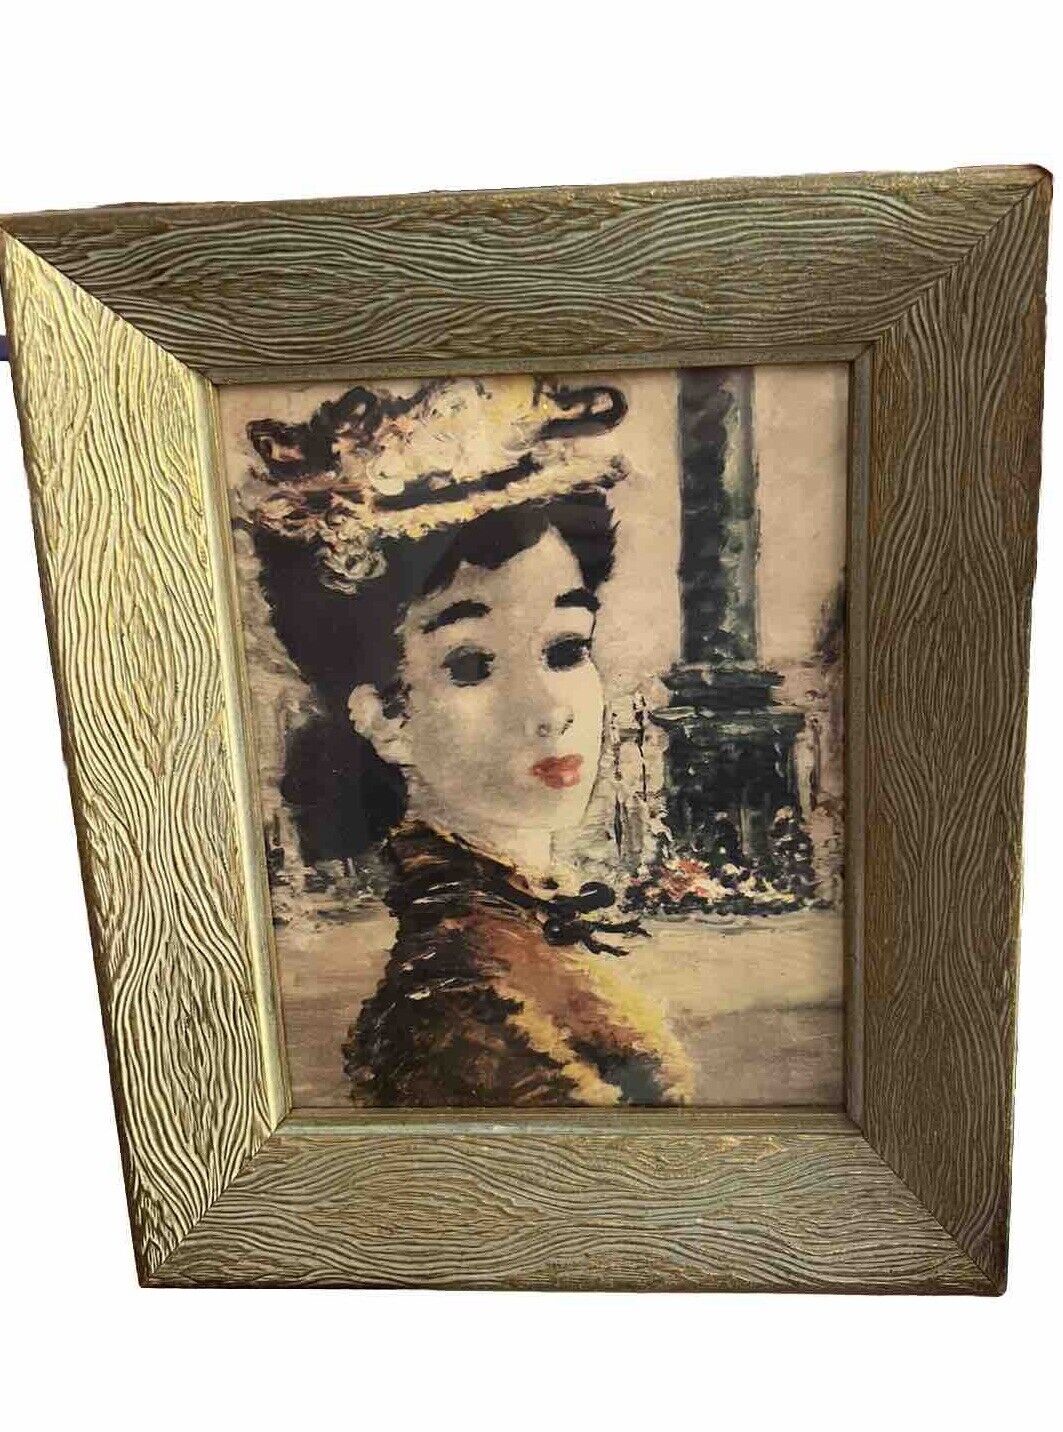 Gold Wood Picture Frame Vintage Victorian Girl Repro. Painting, Vry Gd, 10x12 In